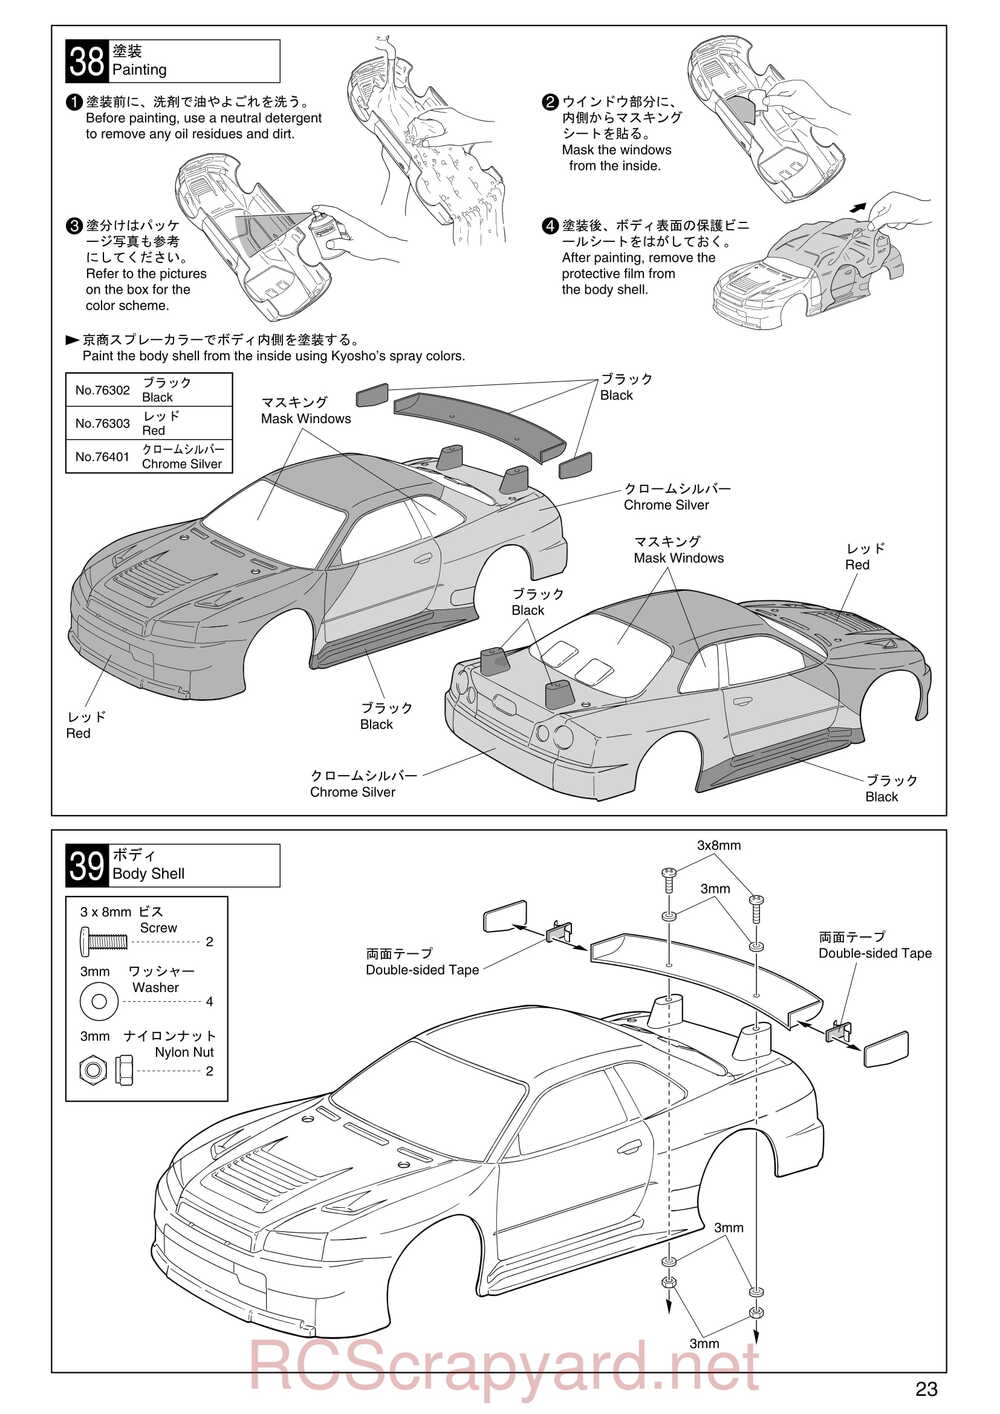 Kyosho - 31213 - TR-15 Monster-Touring - Manual - Page 23